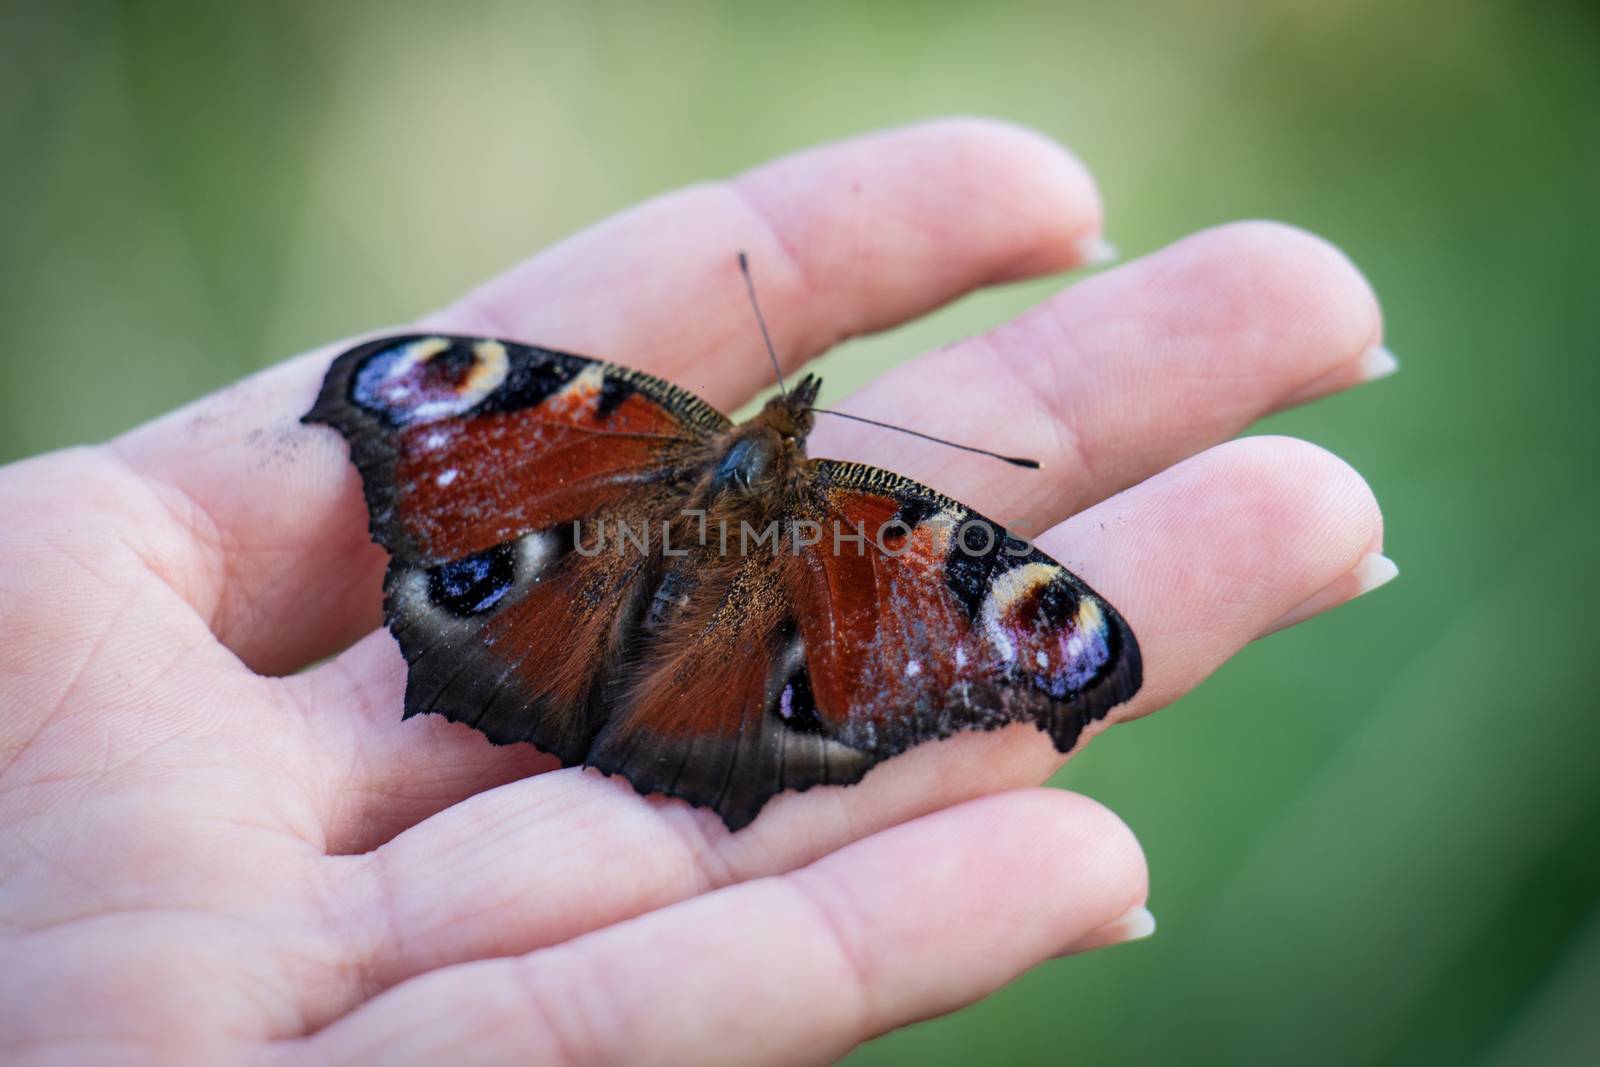 Colorful butterfly on a man's hand. Hand on grass background. Summer season.